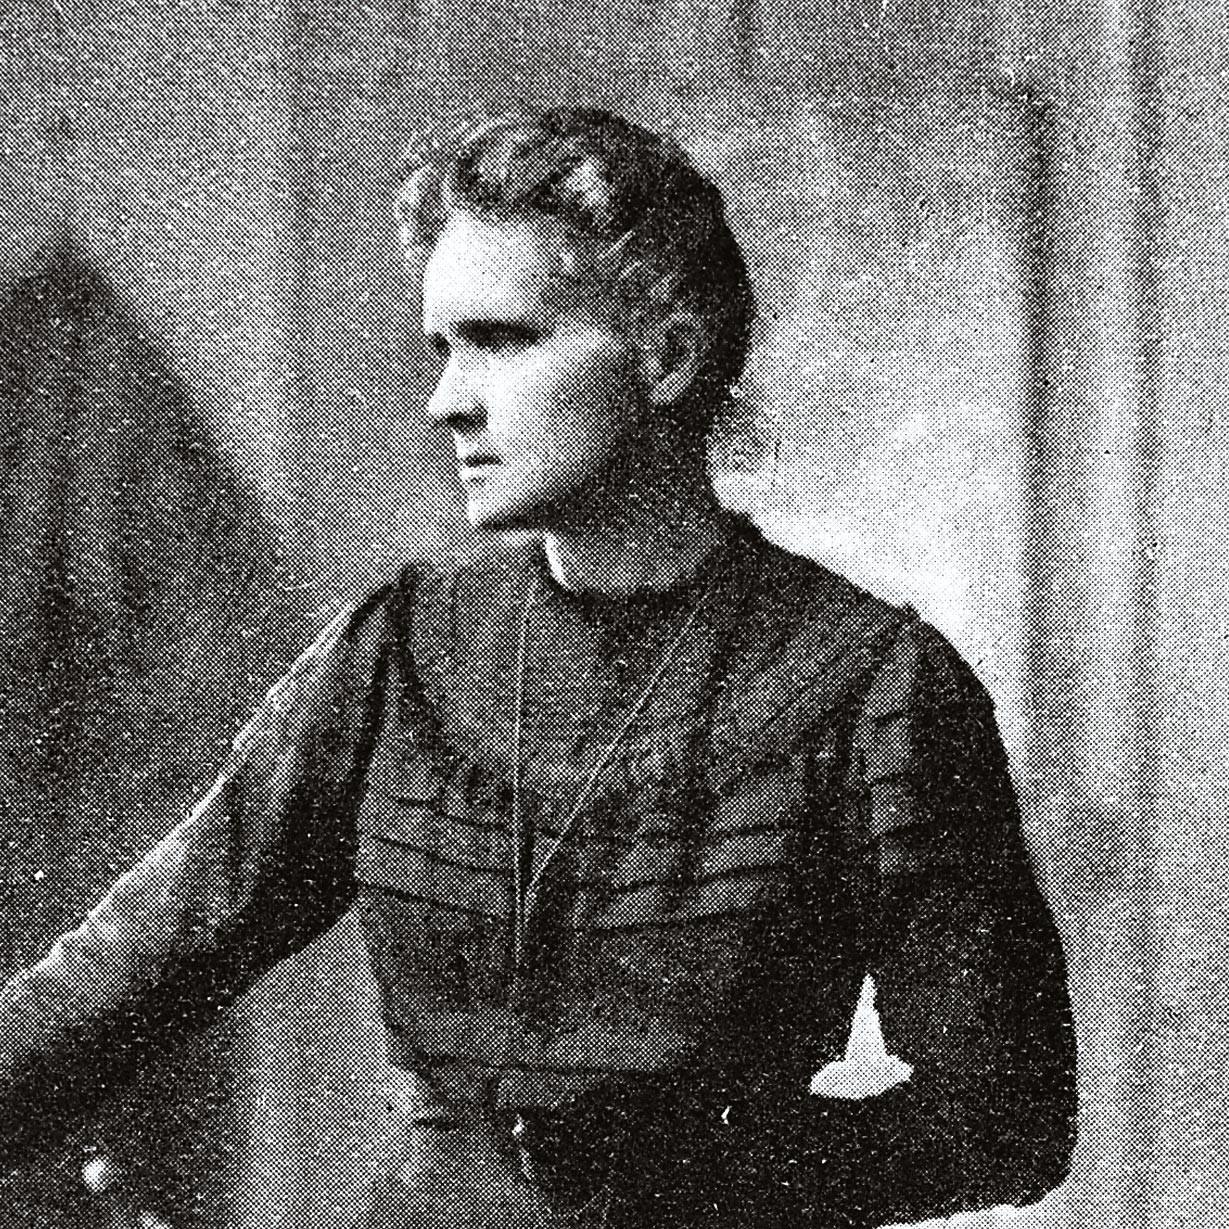 Marie curie (1867-1934)